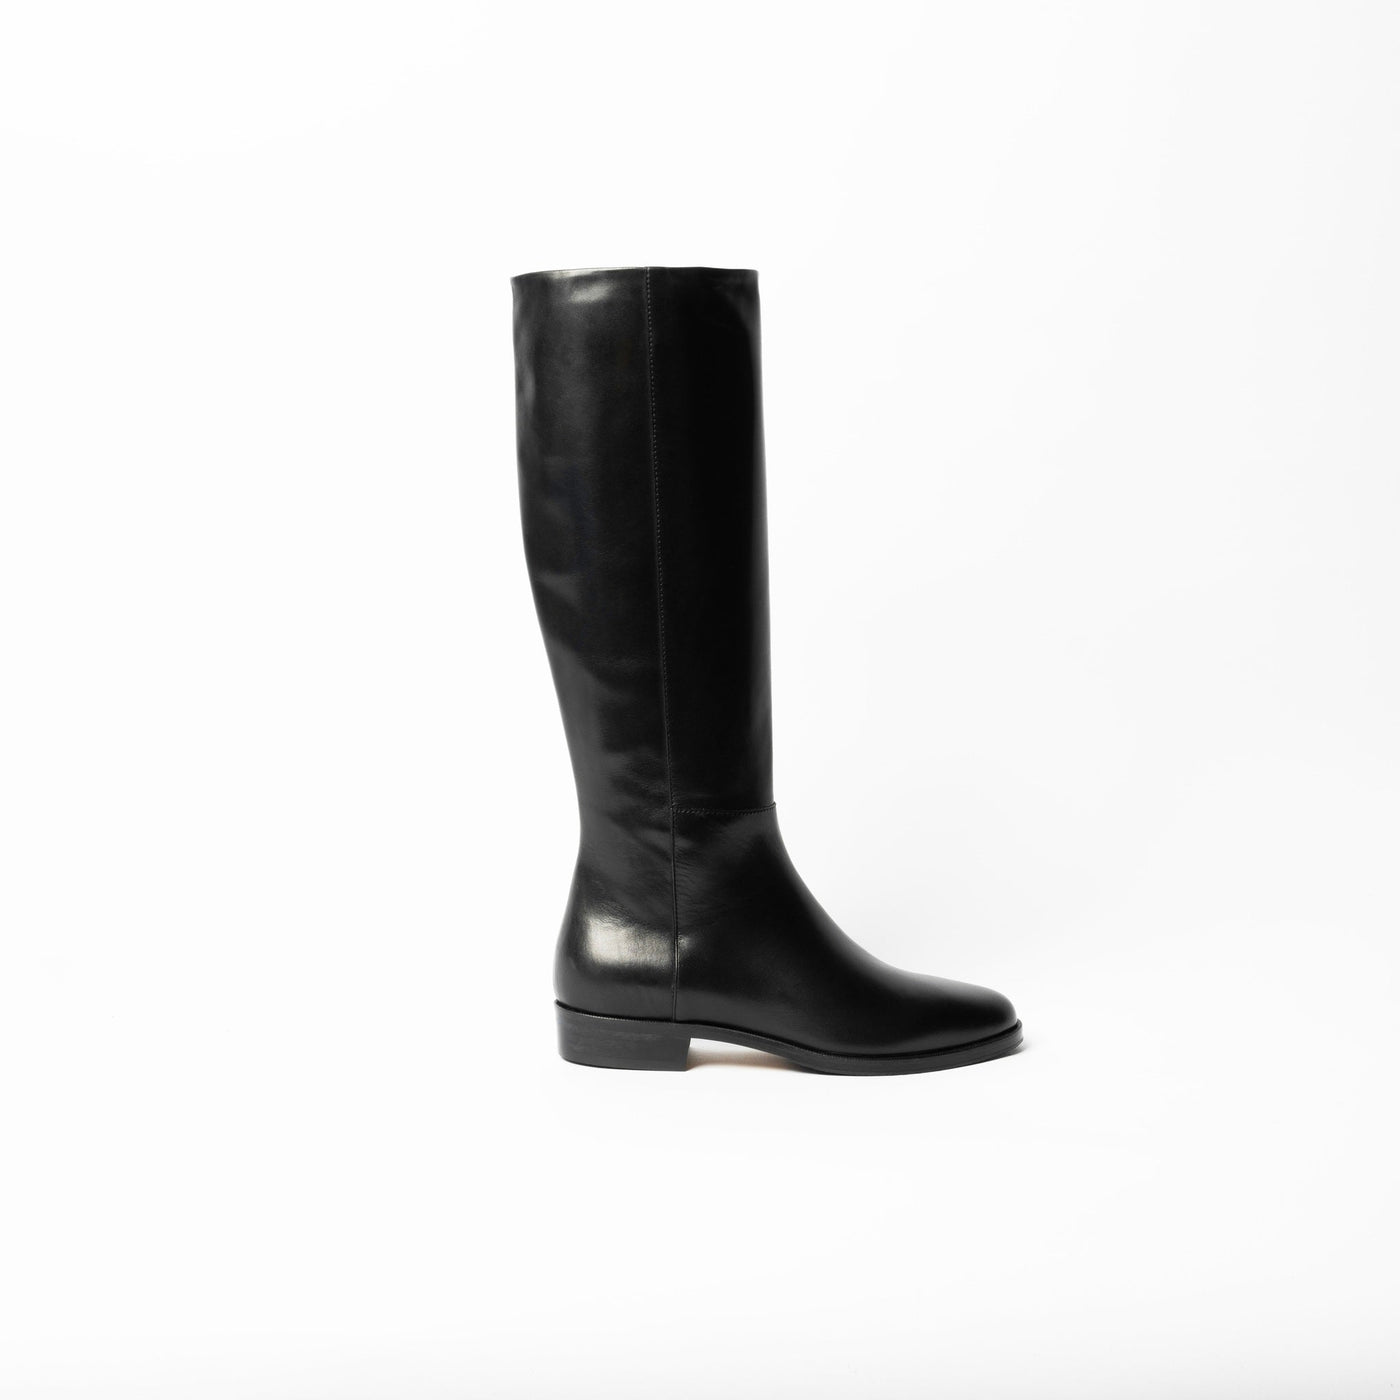 Women's black classic leather riding boots. 